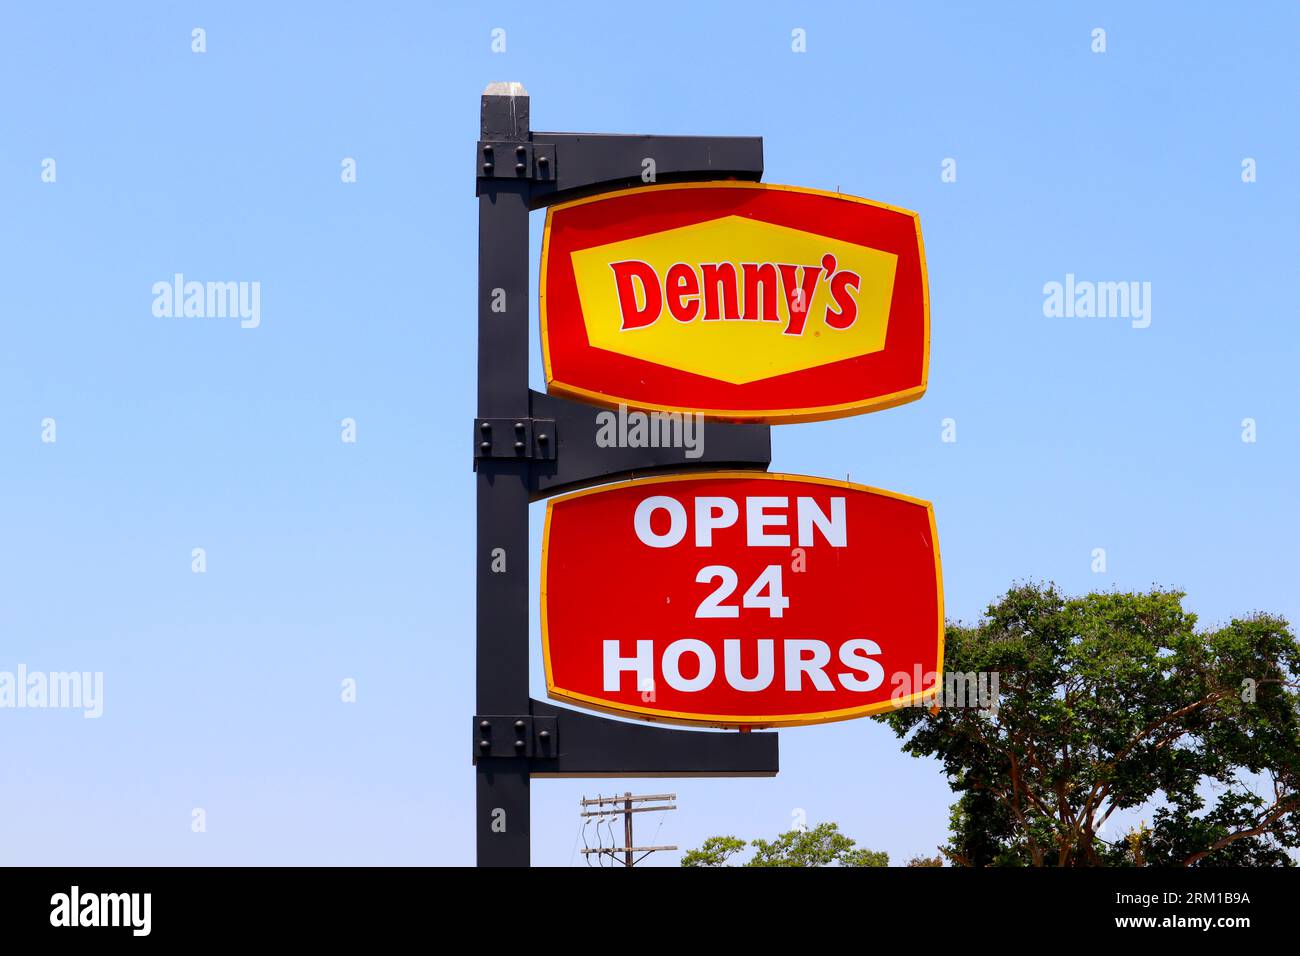 First Denny's drive-thru in California just opened